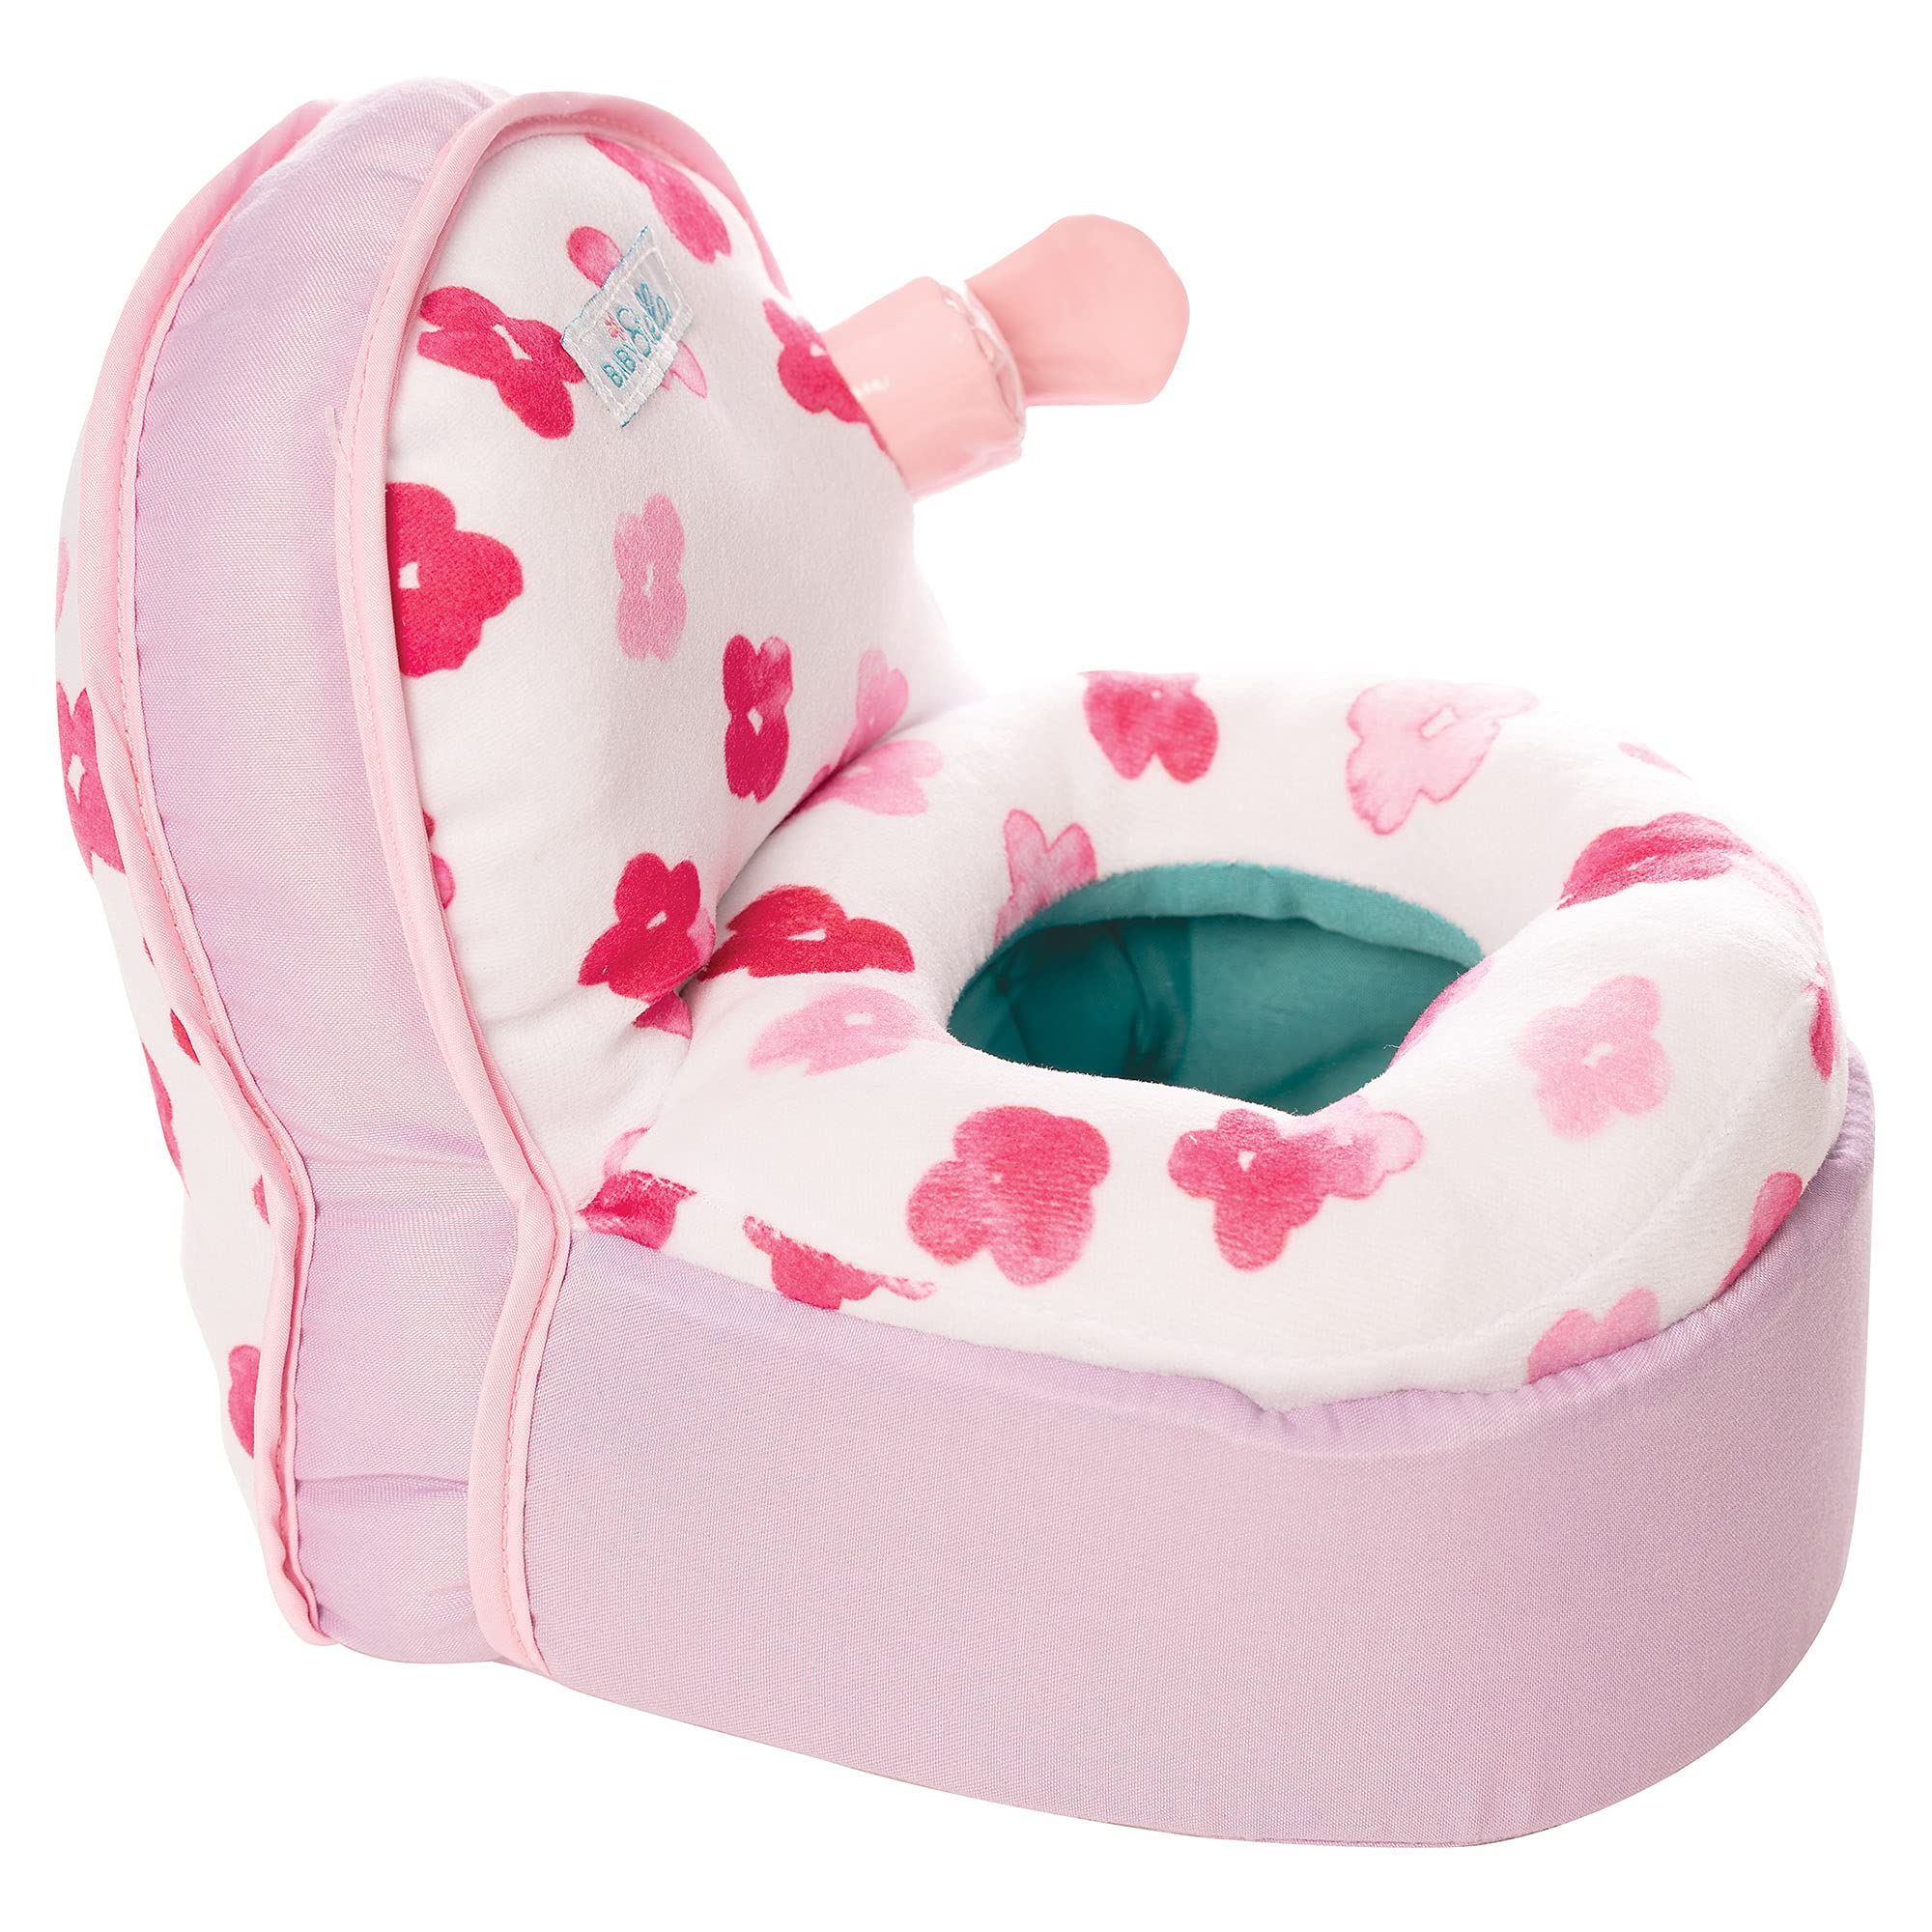 Manhattan Toy Baby Stella Playtime Potty Chair Baby Doll Accessory for 12